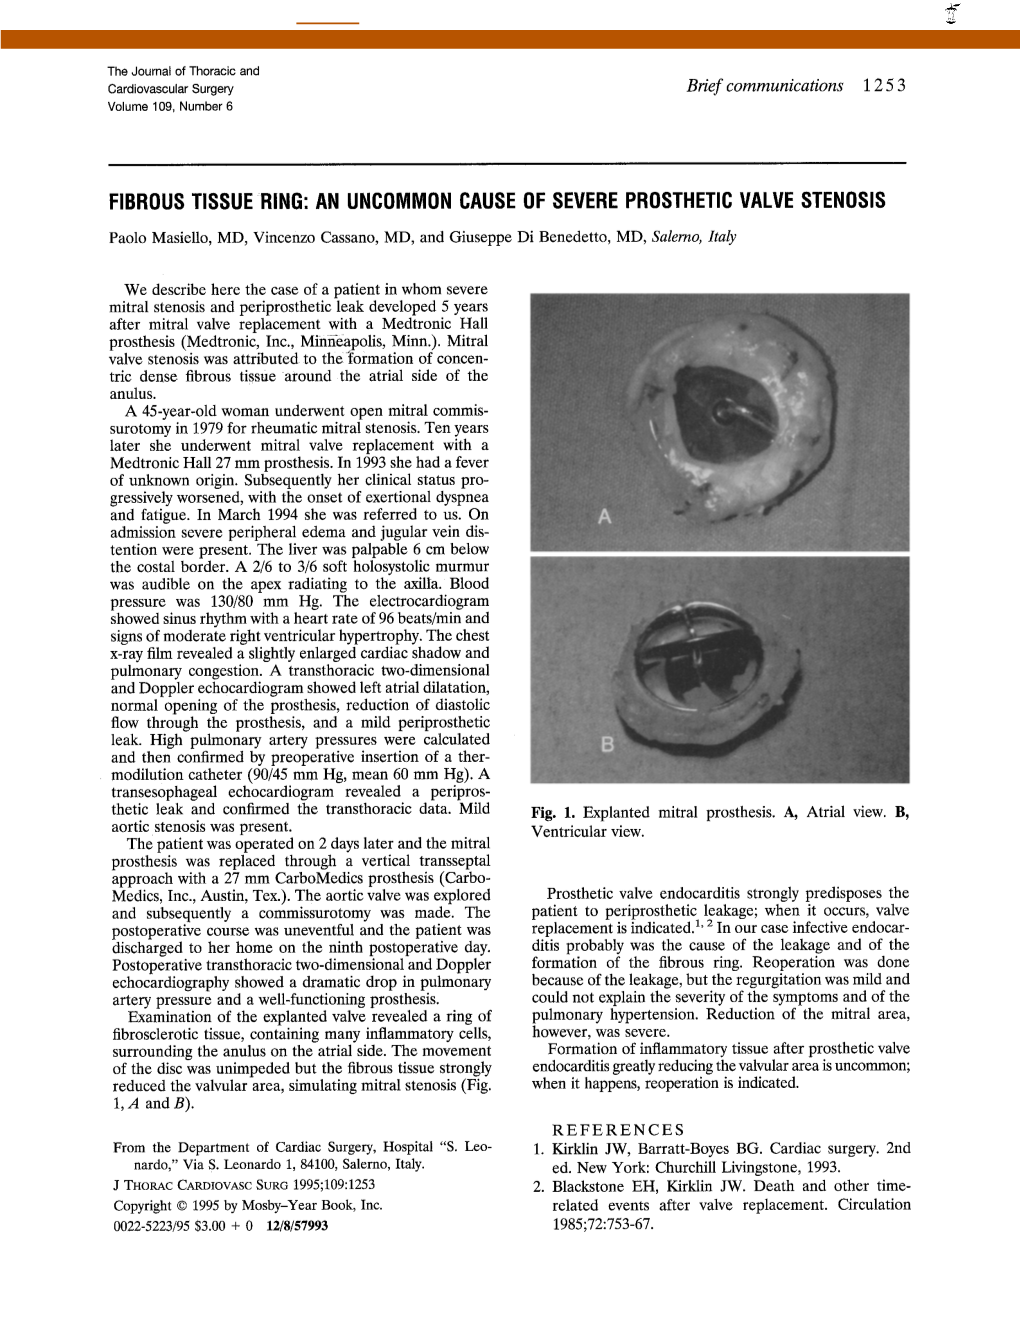 Fibrous Tissue Ring: an Uncommon Cause of Severe Prosthetic Valve Stenosis